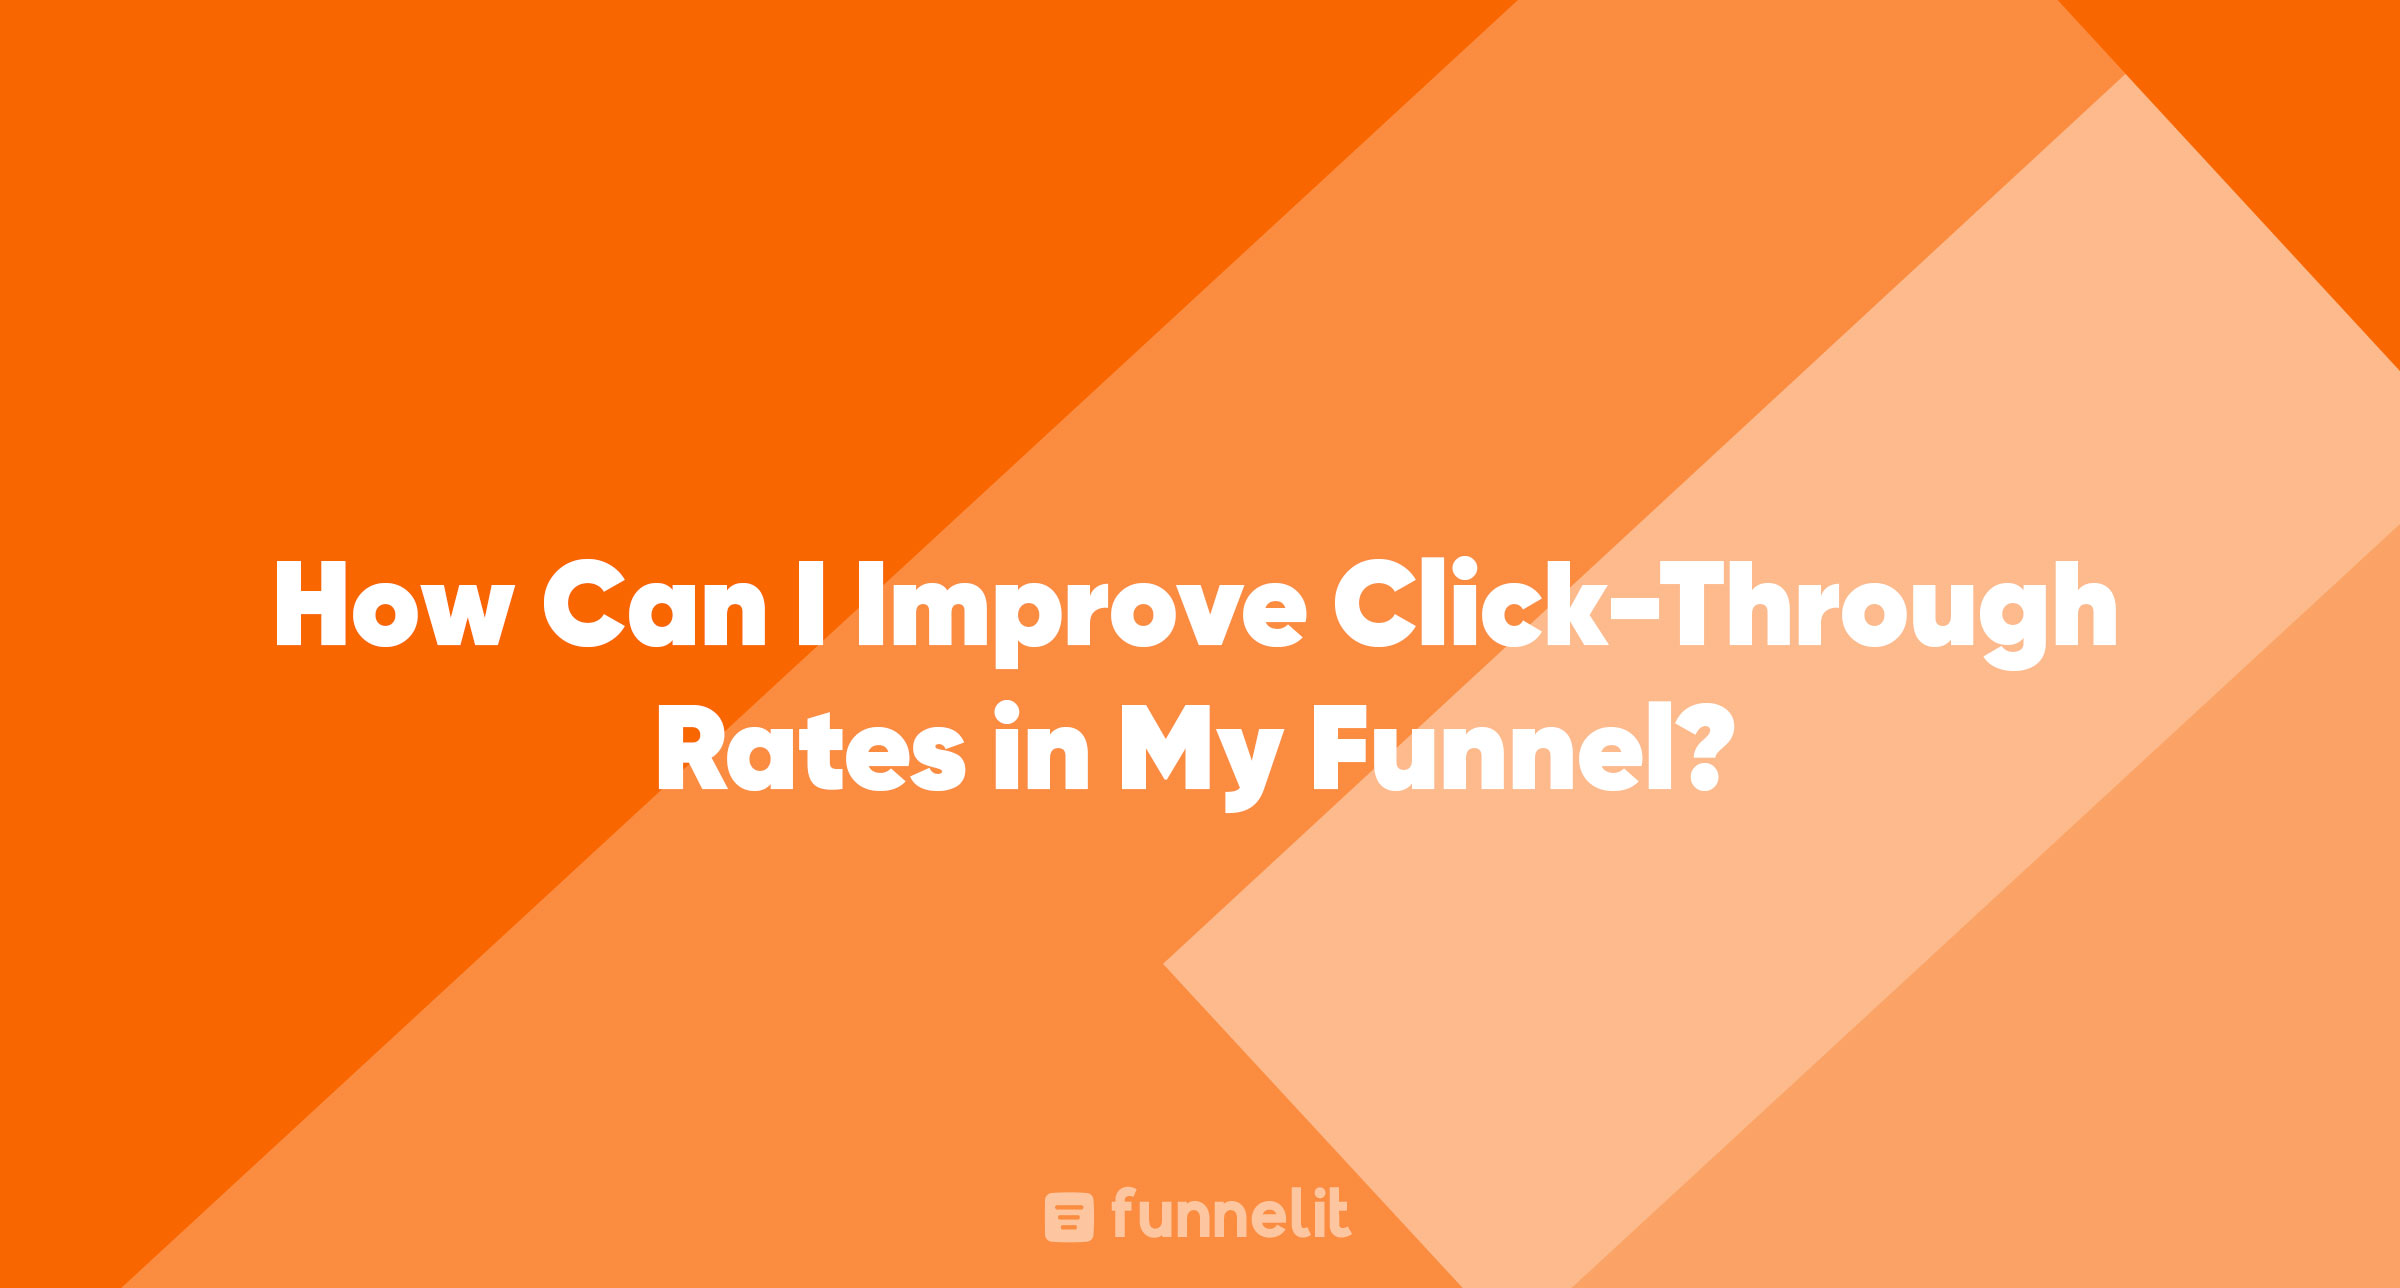 Article | How Can I Improve Click-Through Rates in My Funnel?